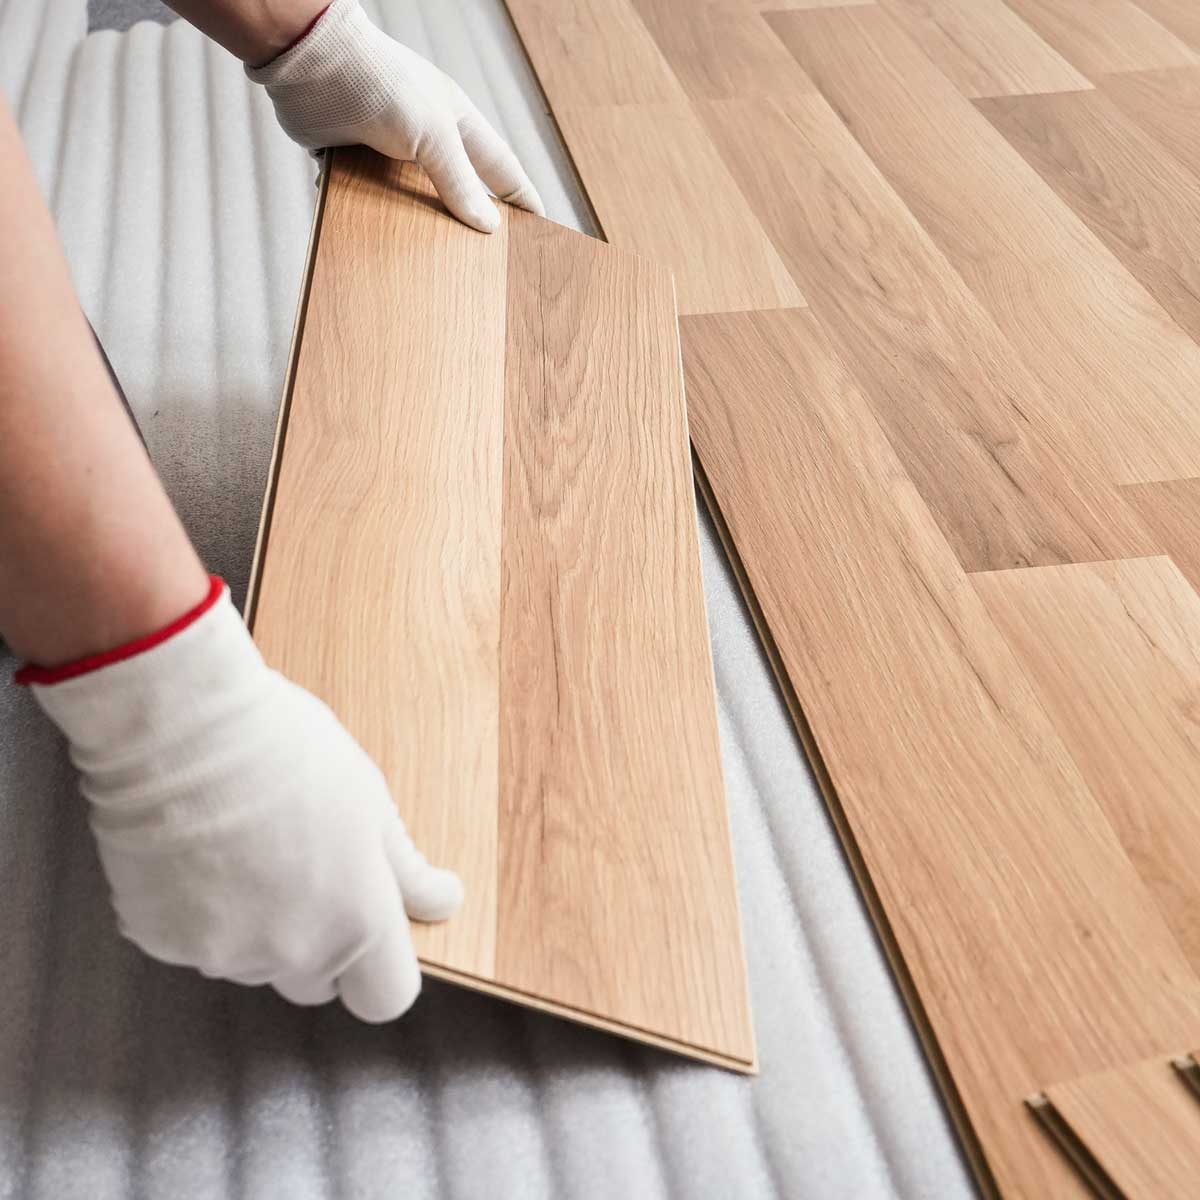 8 Essential Tools For Laminate Flooring Installations The Family Handyman